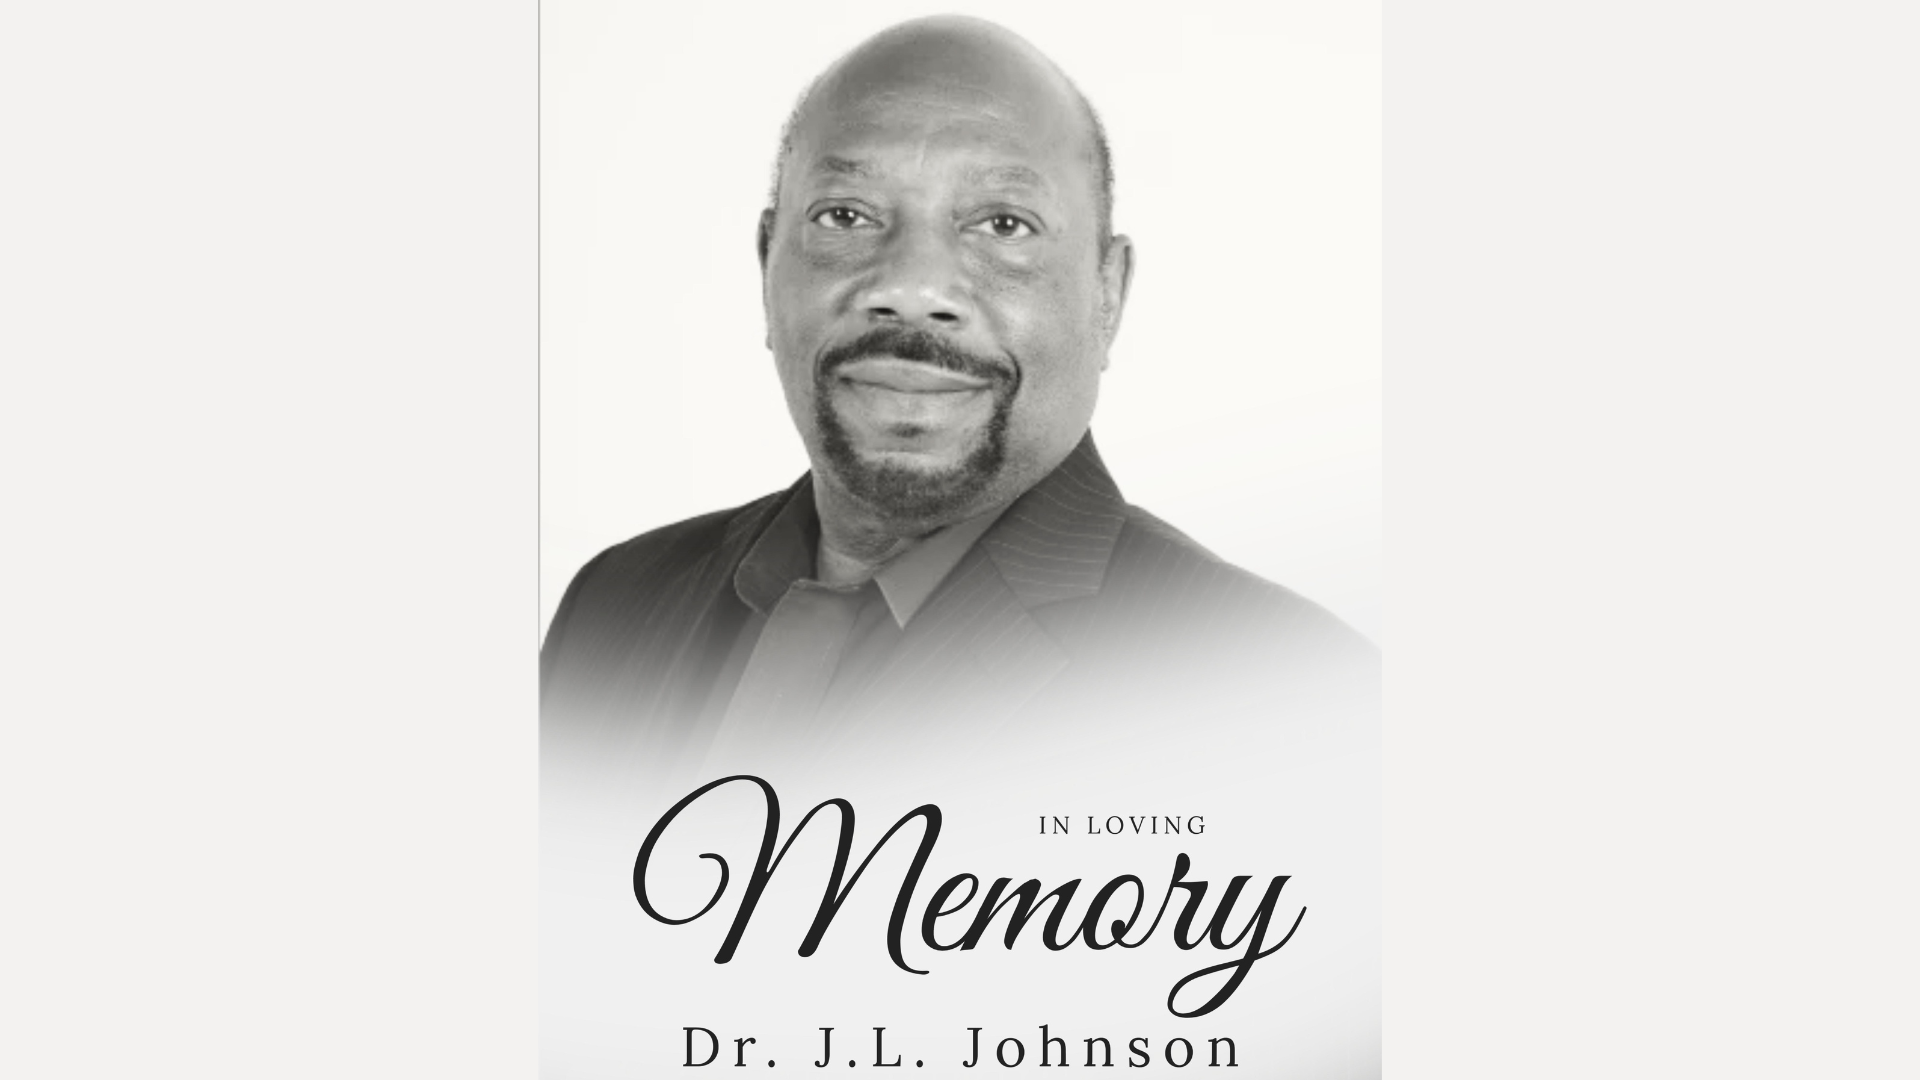 Holistic Health Pioneer Dr. J.L. Johnson, PH.D. Remembered for Legacy of Healing